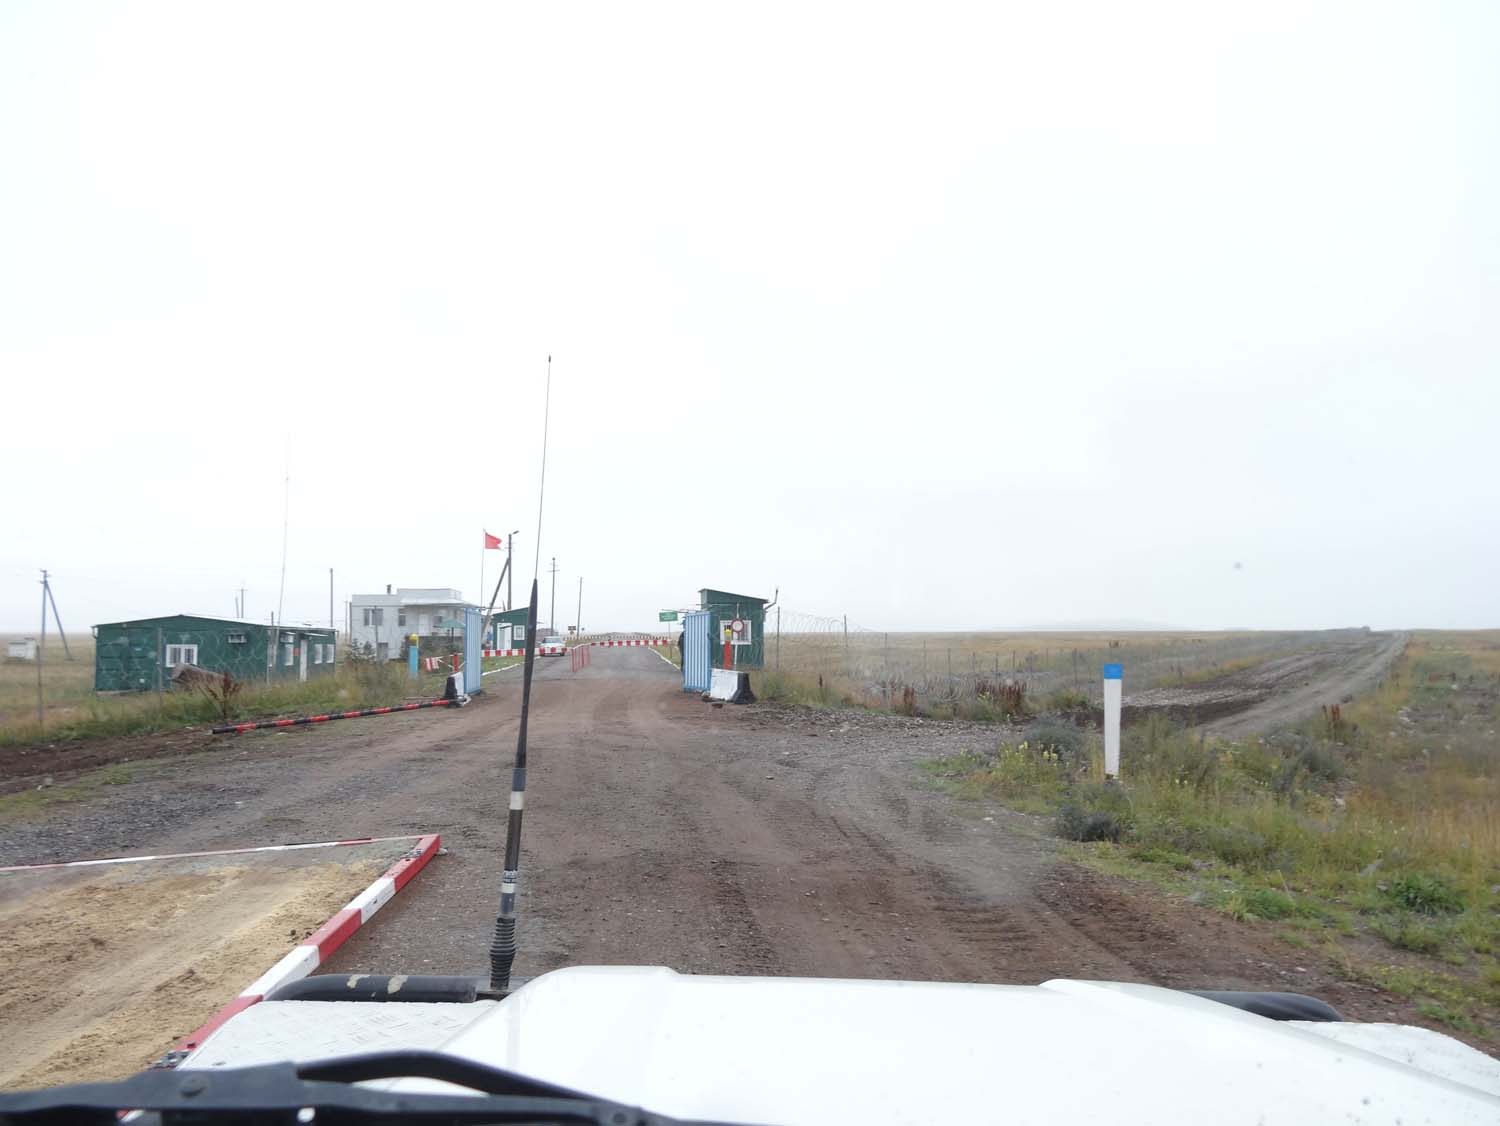 you can just see the sandpit where cars have to drive through going into Kazakhstan. This is the view of the Kyrgyz side of the border post